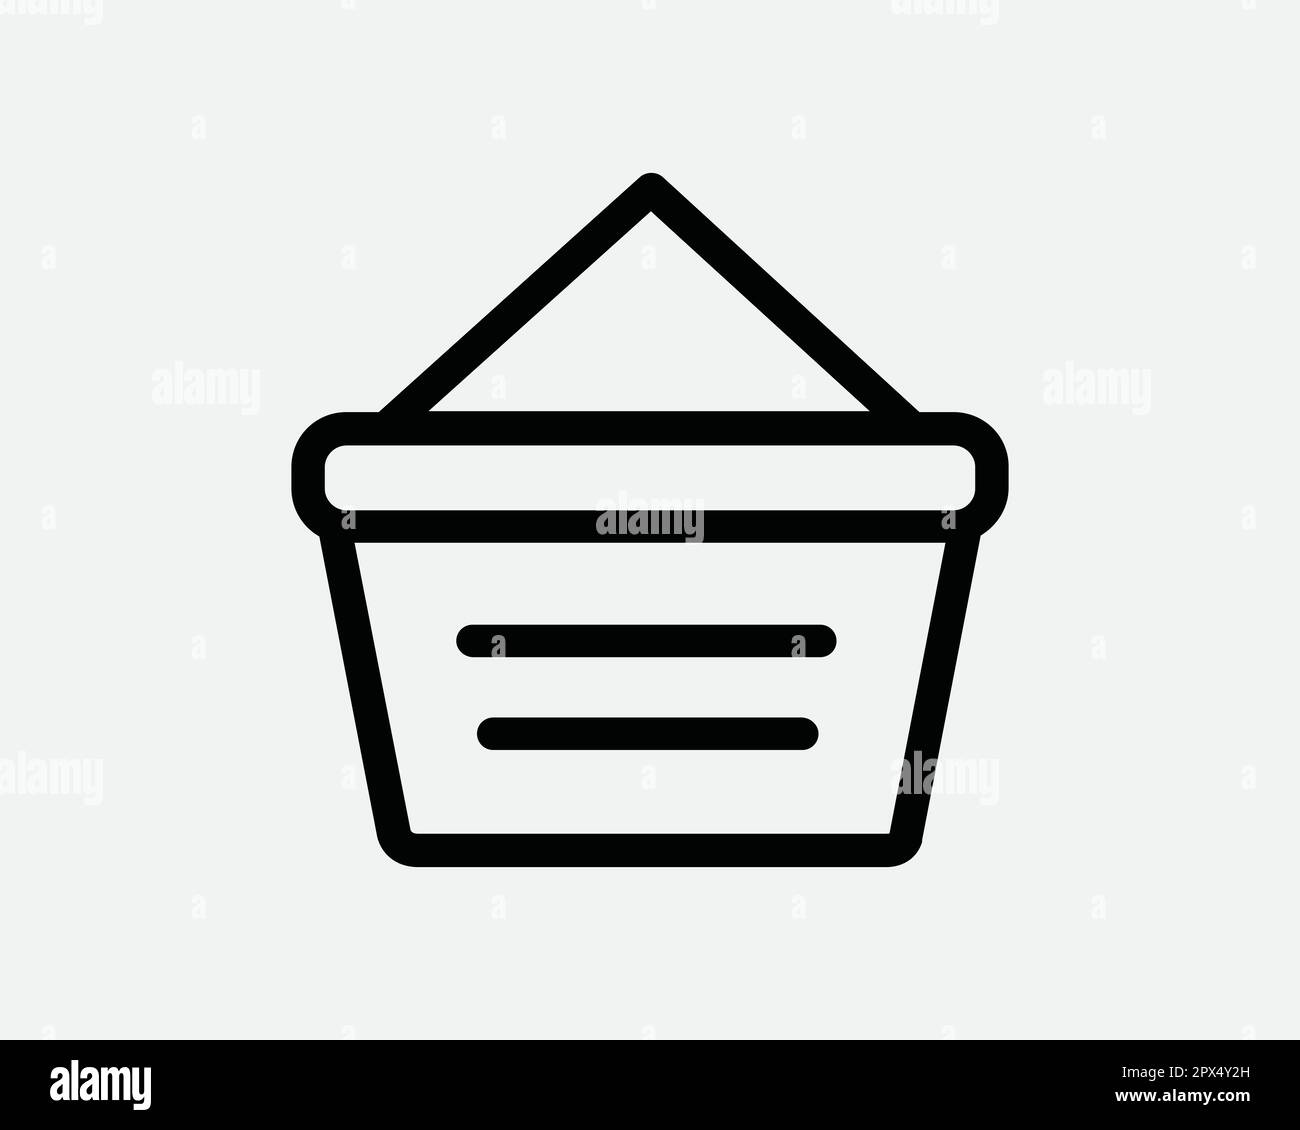 Basket Line Icon. Checkout Cart Online Shopping Linear Symbol. Sale Market Grocery Retail Shop Sign. Black Thin Vector Graphic Illustration Clipart Stock Vector